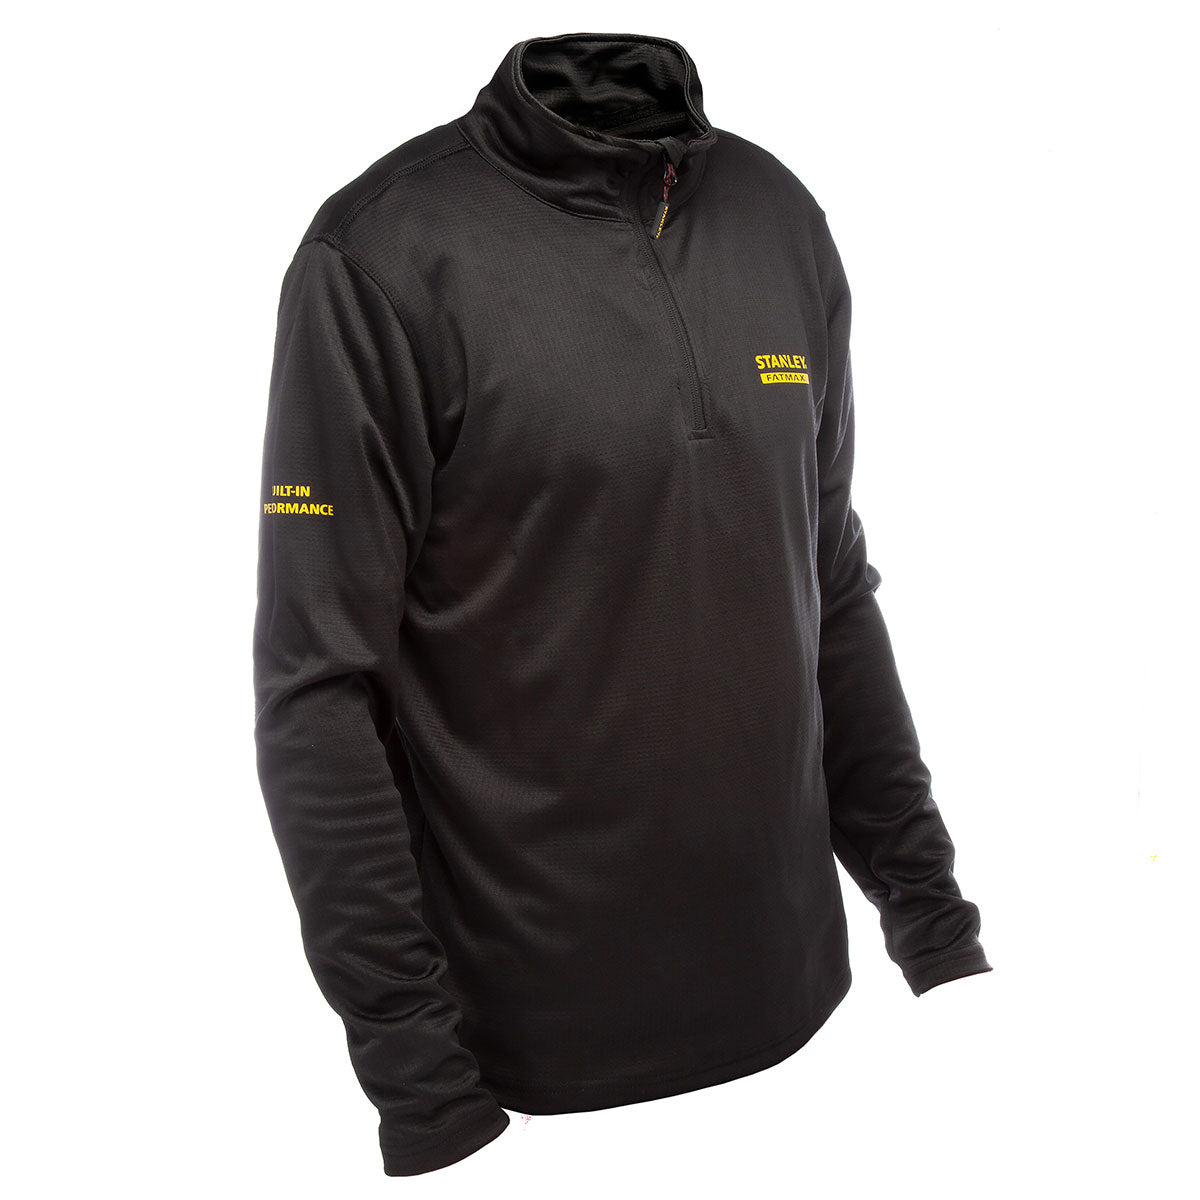 Stanley Fatmax Clydeford 1/4 Zip Top Size Large SFM-STW40049-001-L